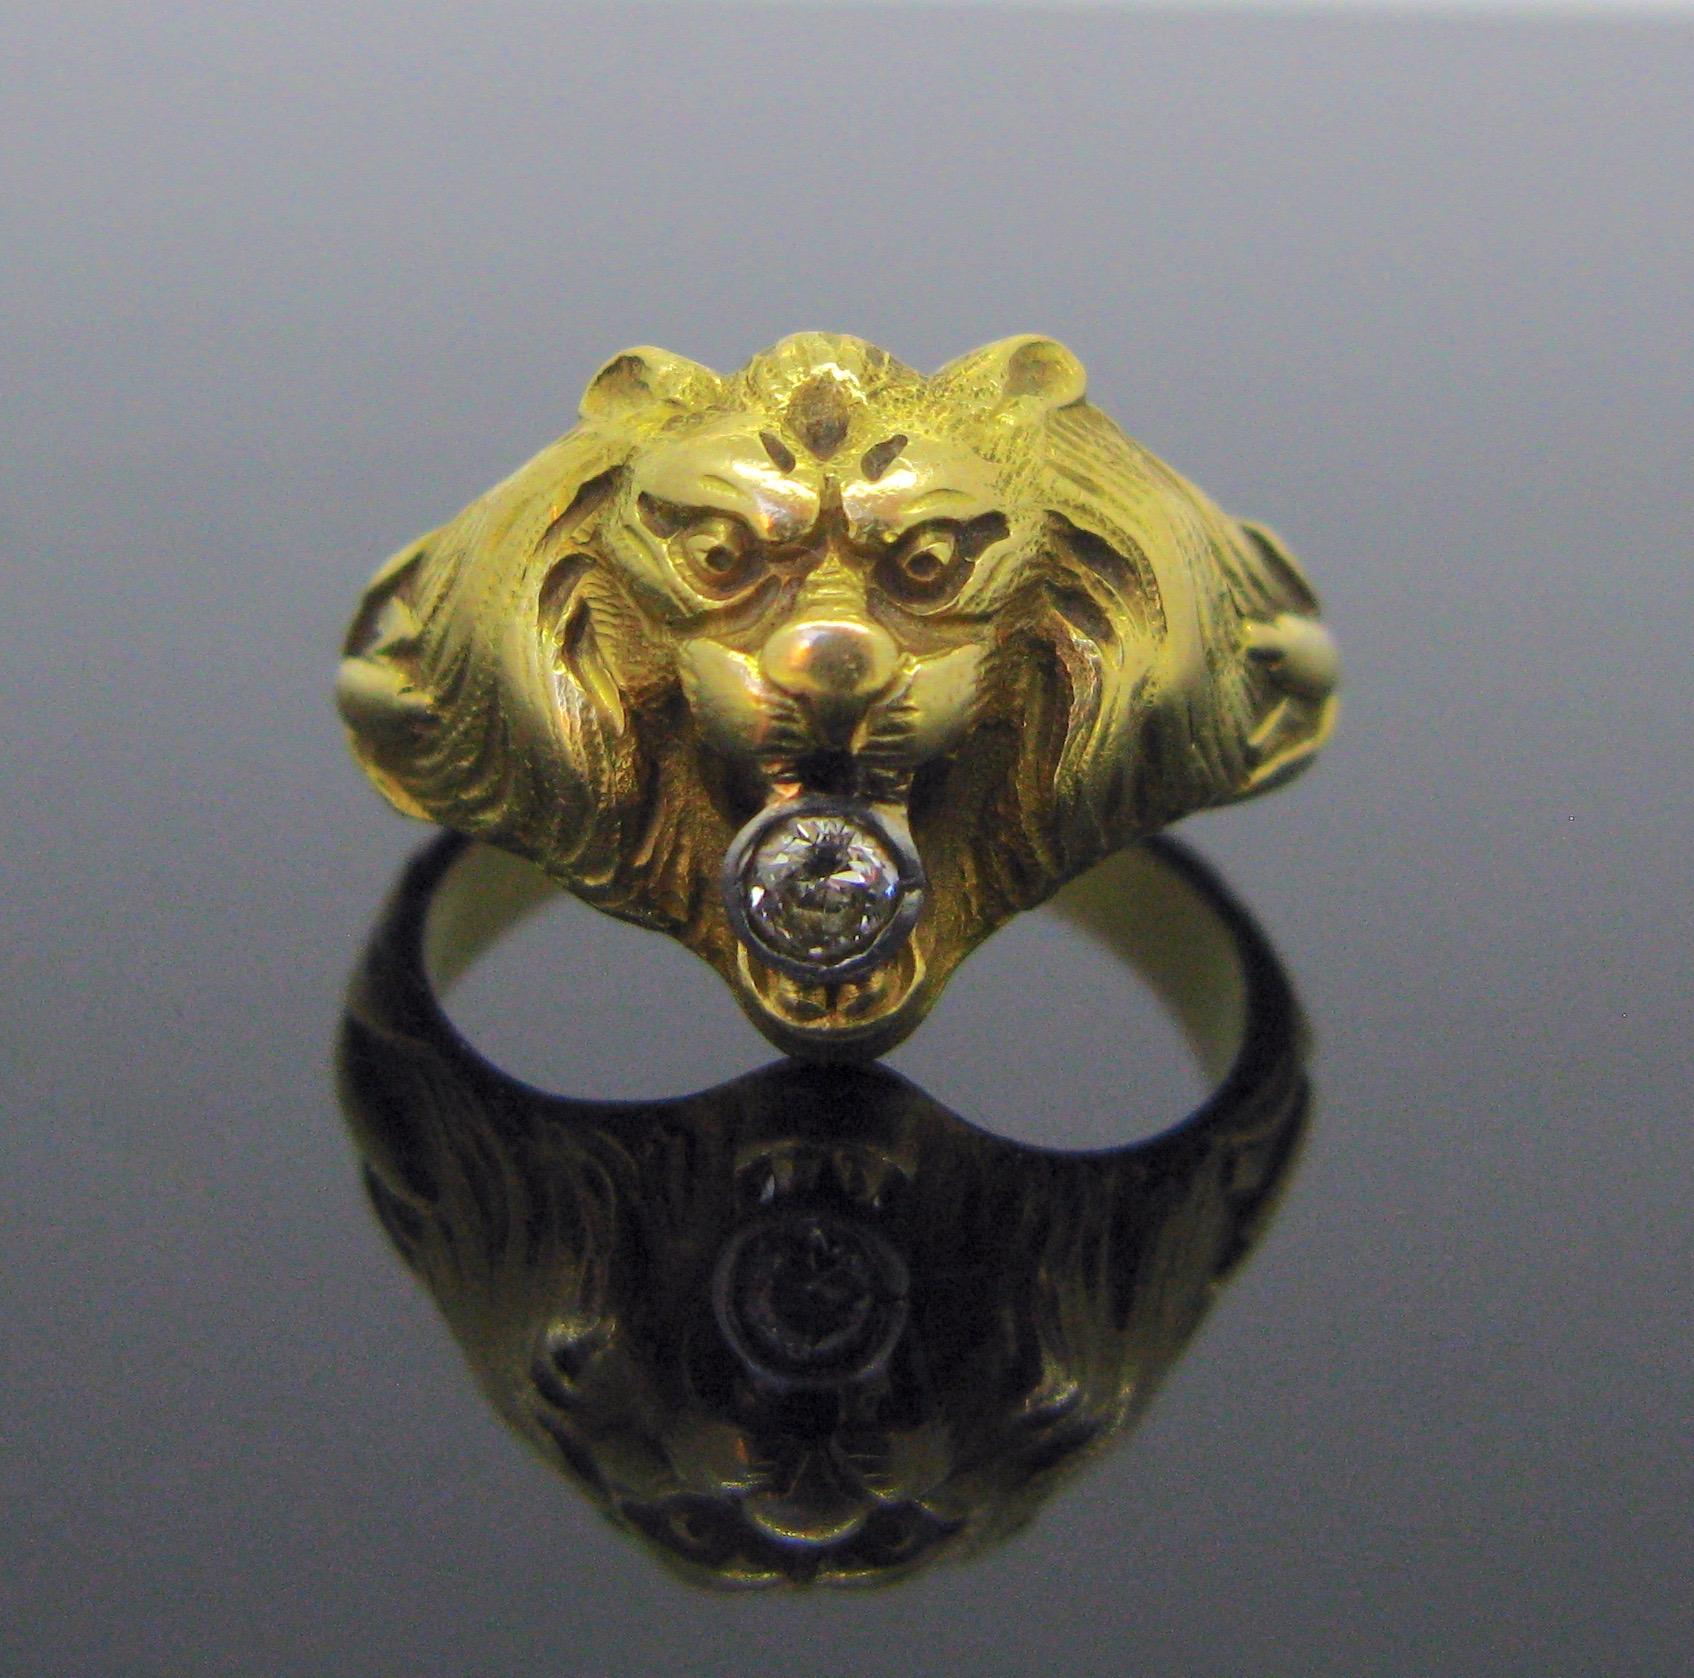 This ring was nicely designed into a Lion head. It has a strong design. It depicts a regal lion with flowing mane in exceptional detail. It holds in his jaws an old mine cut diamond weighing around 0.20ct. The ring is very good antique condition. It